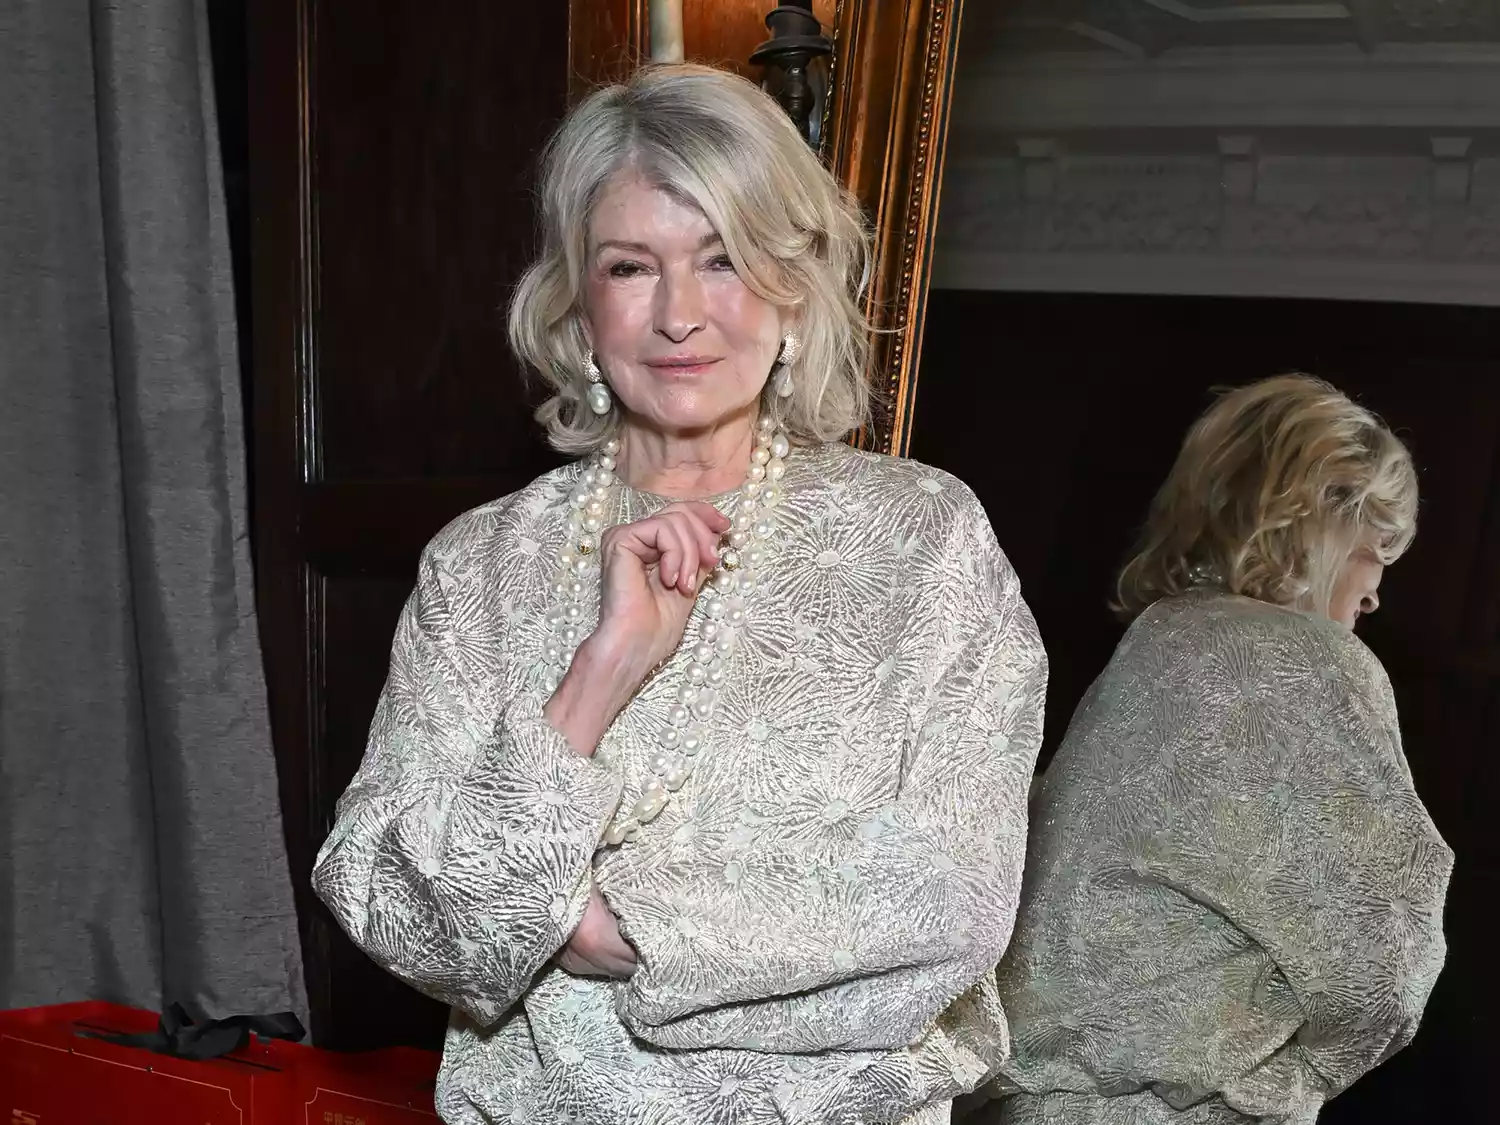 Martha Stewart Revealed the Product She Uses “Every Single Morning” for a Glowing Complexion